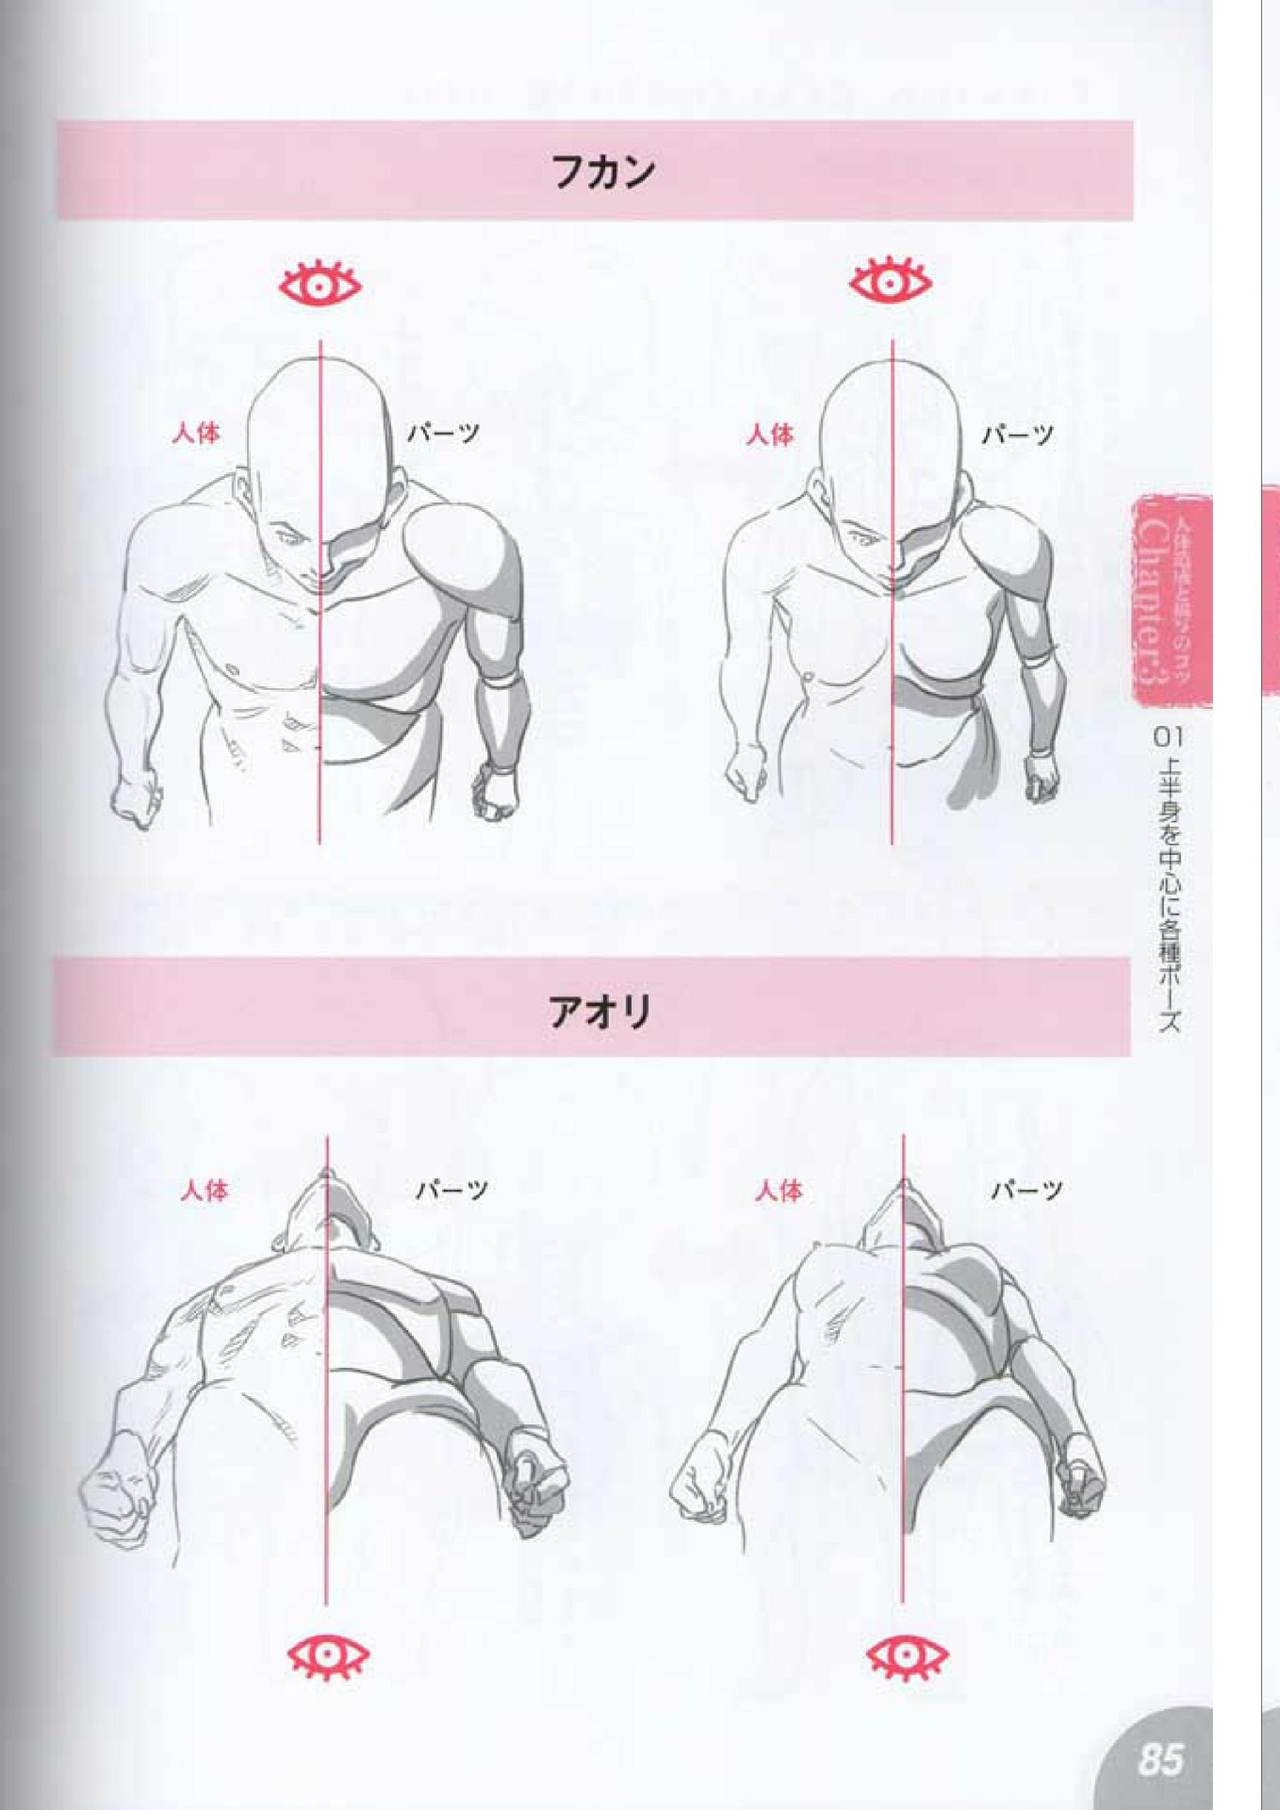 How to draw a character drawing from a human anatomical chart 83